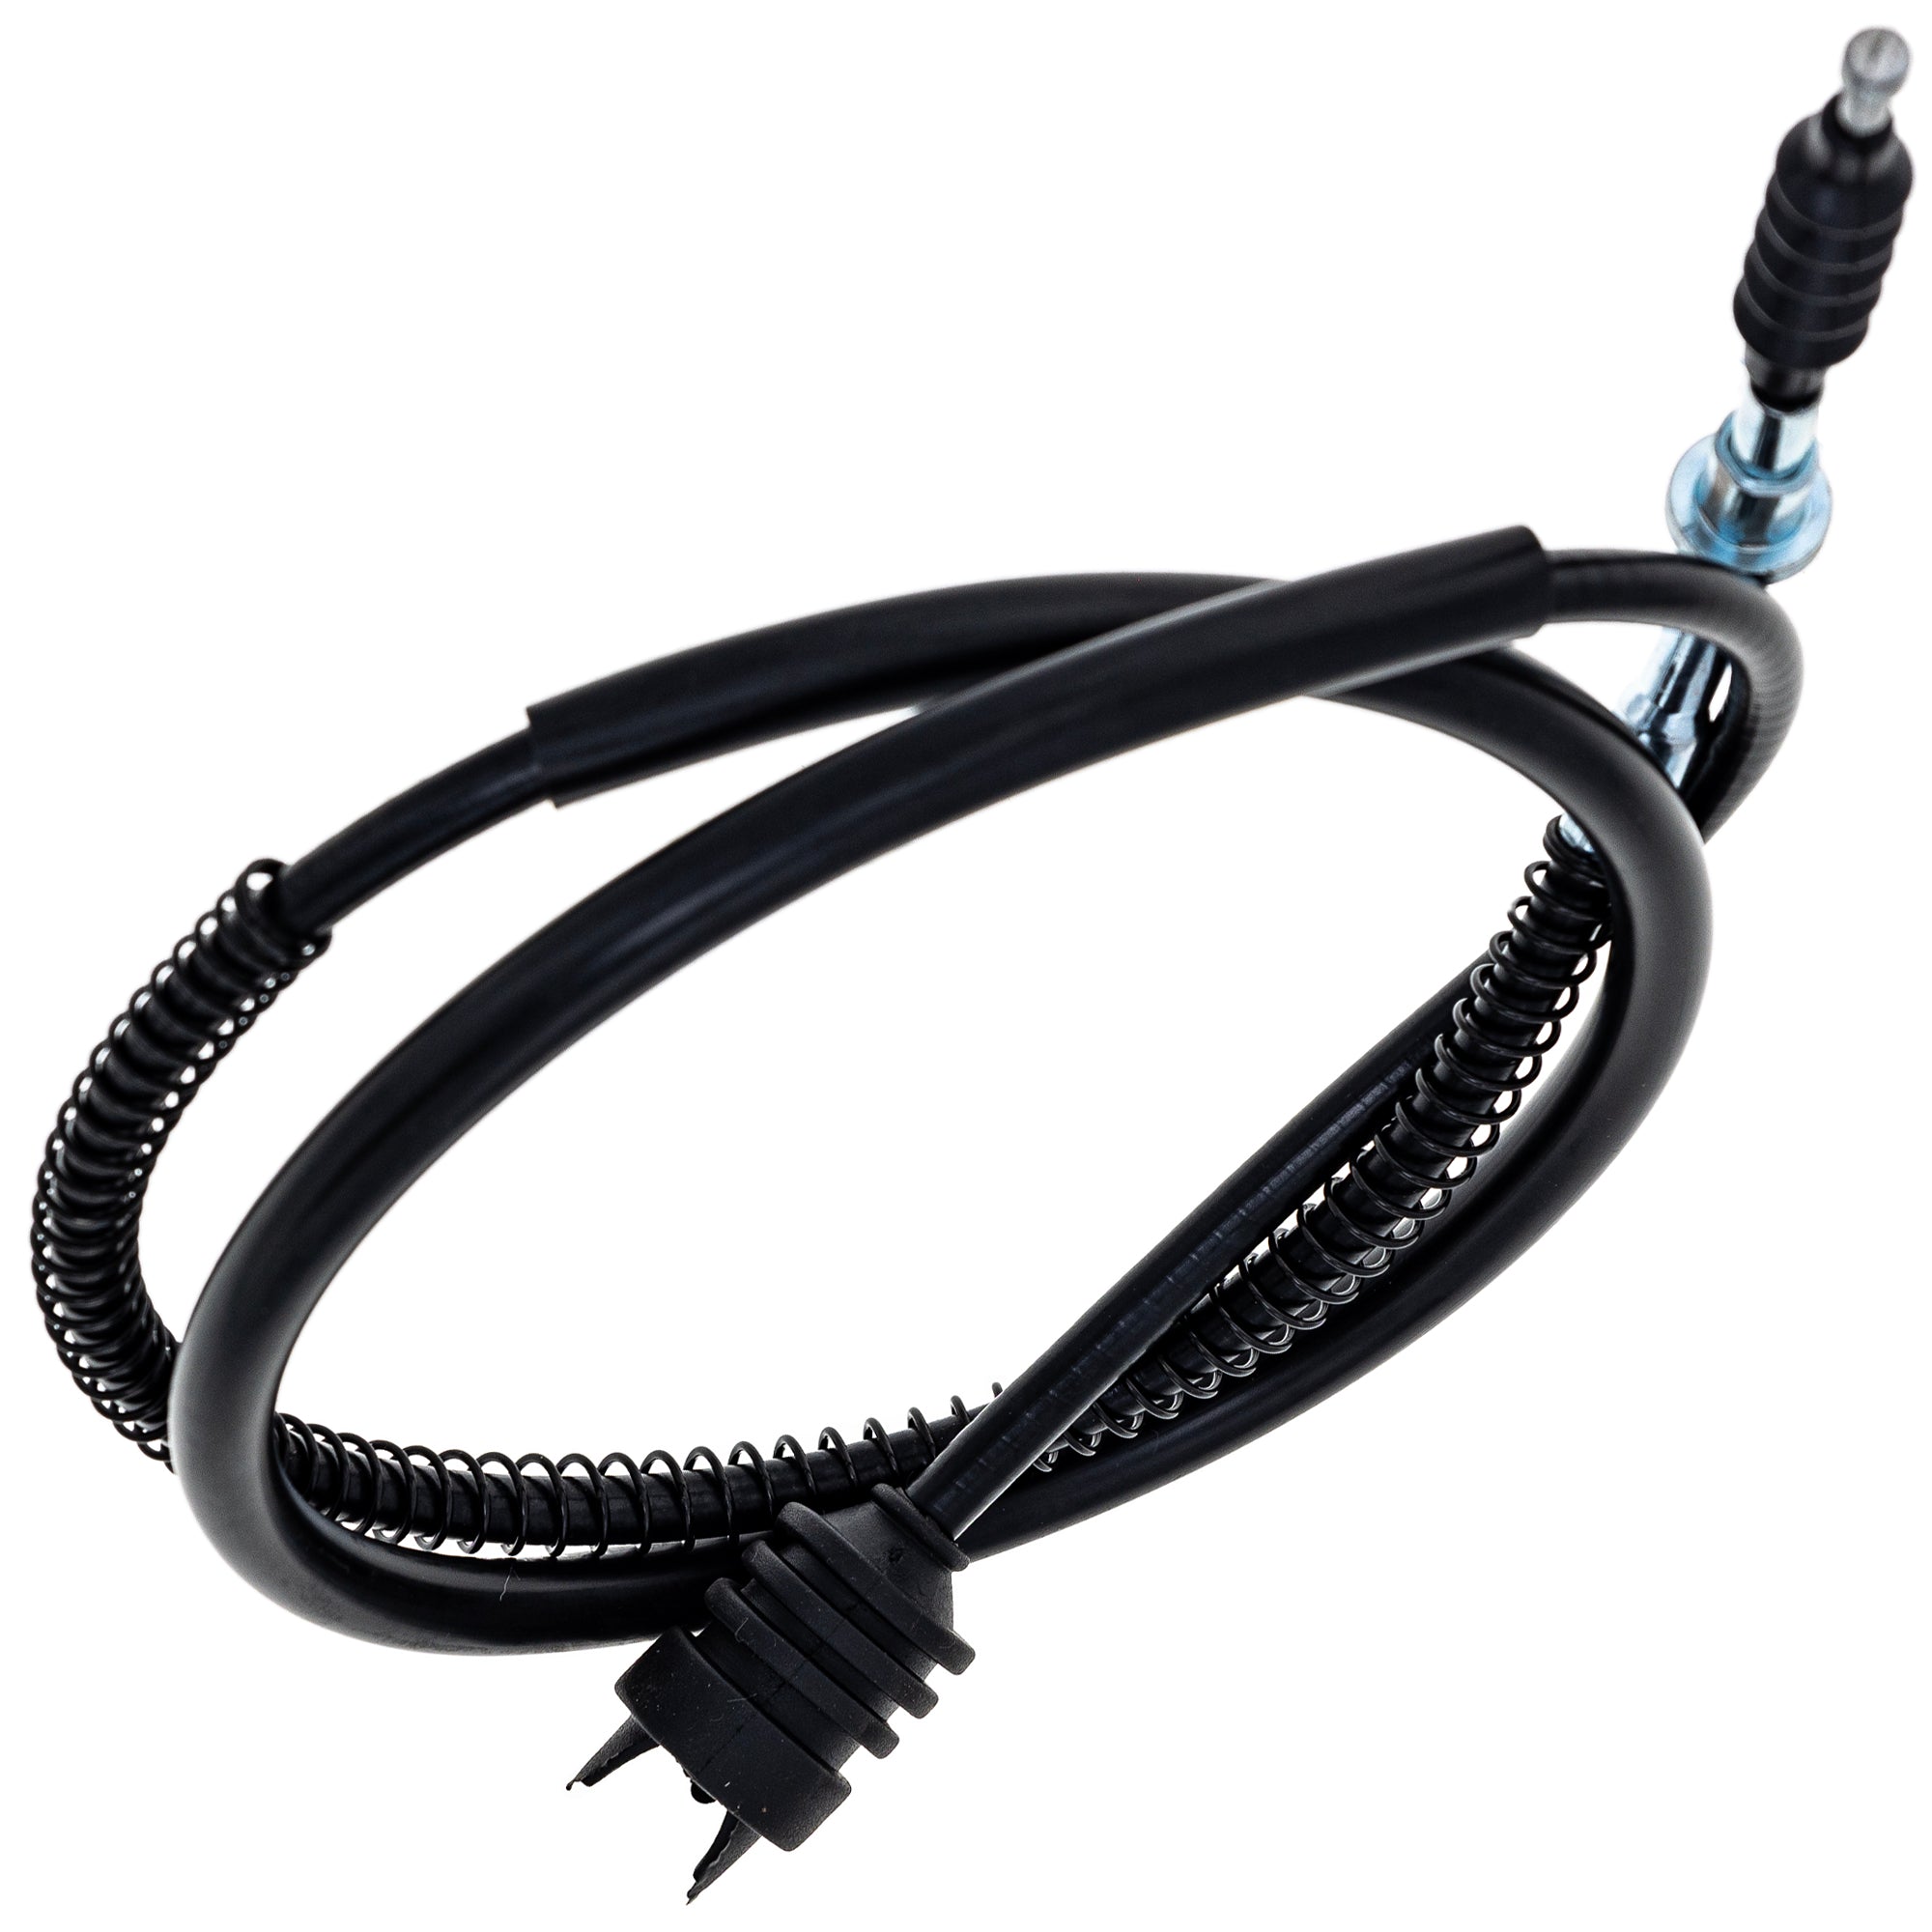 Clutch Cable for Yamaha MX175 DT125 DT175 Motorcycle